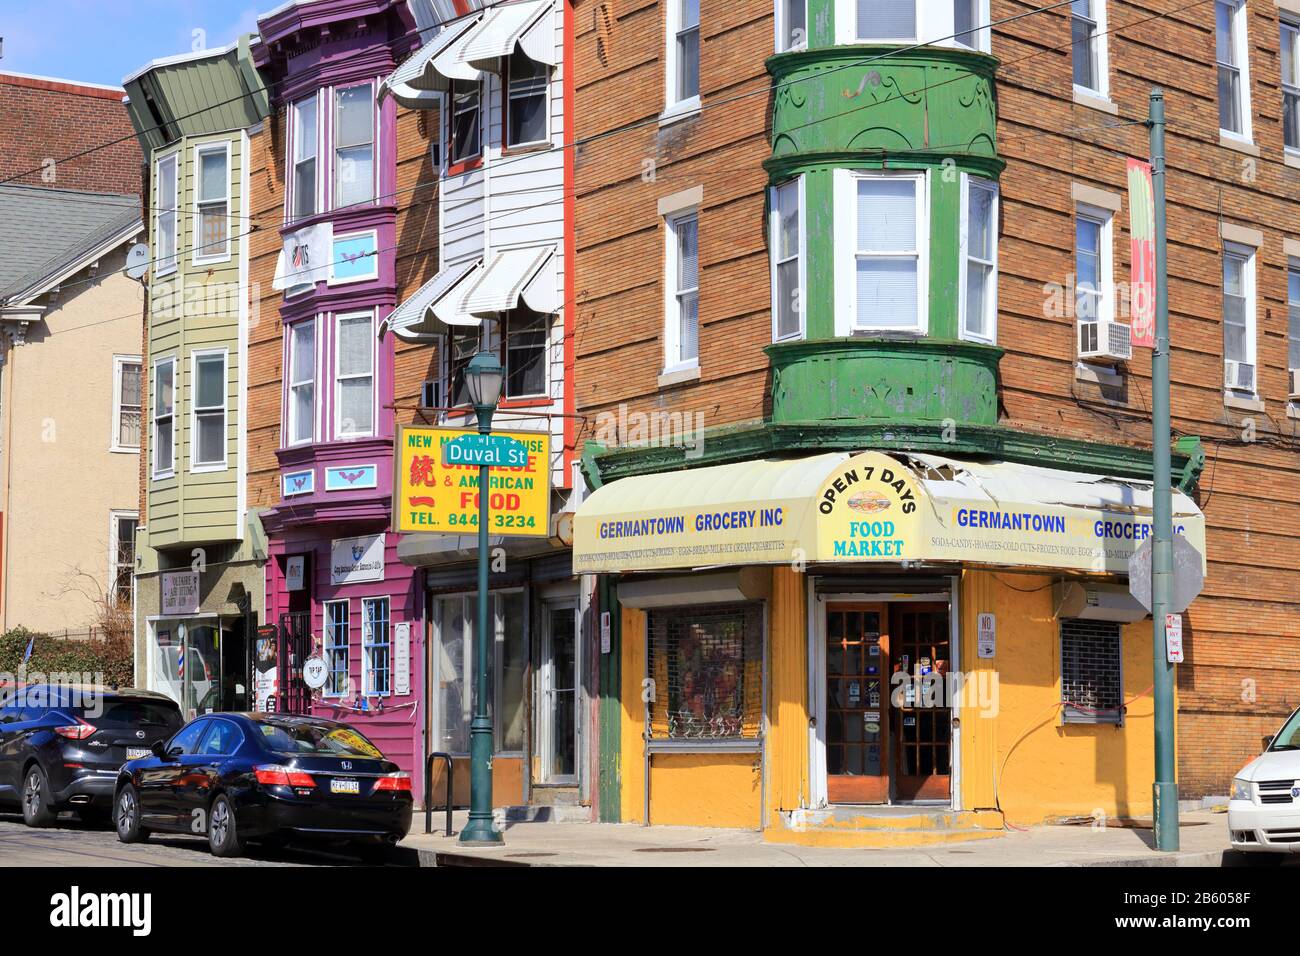 A colorful corner of Germantown with row houses and a corner store at the intersection of Duval St, and Germantown Avenue, Philadelphia, PA. Stock Photo